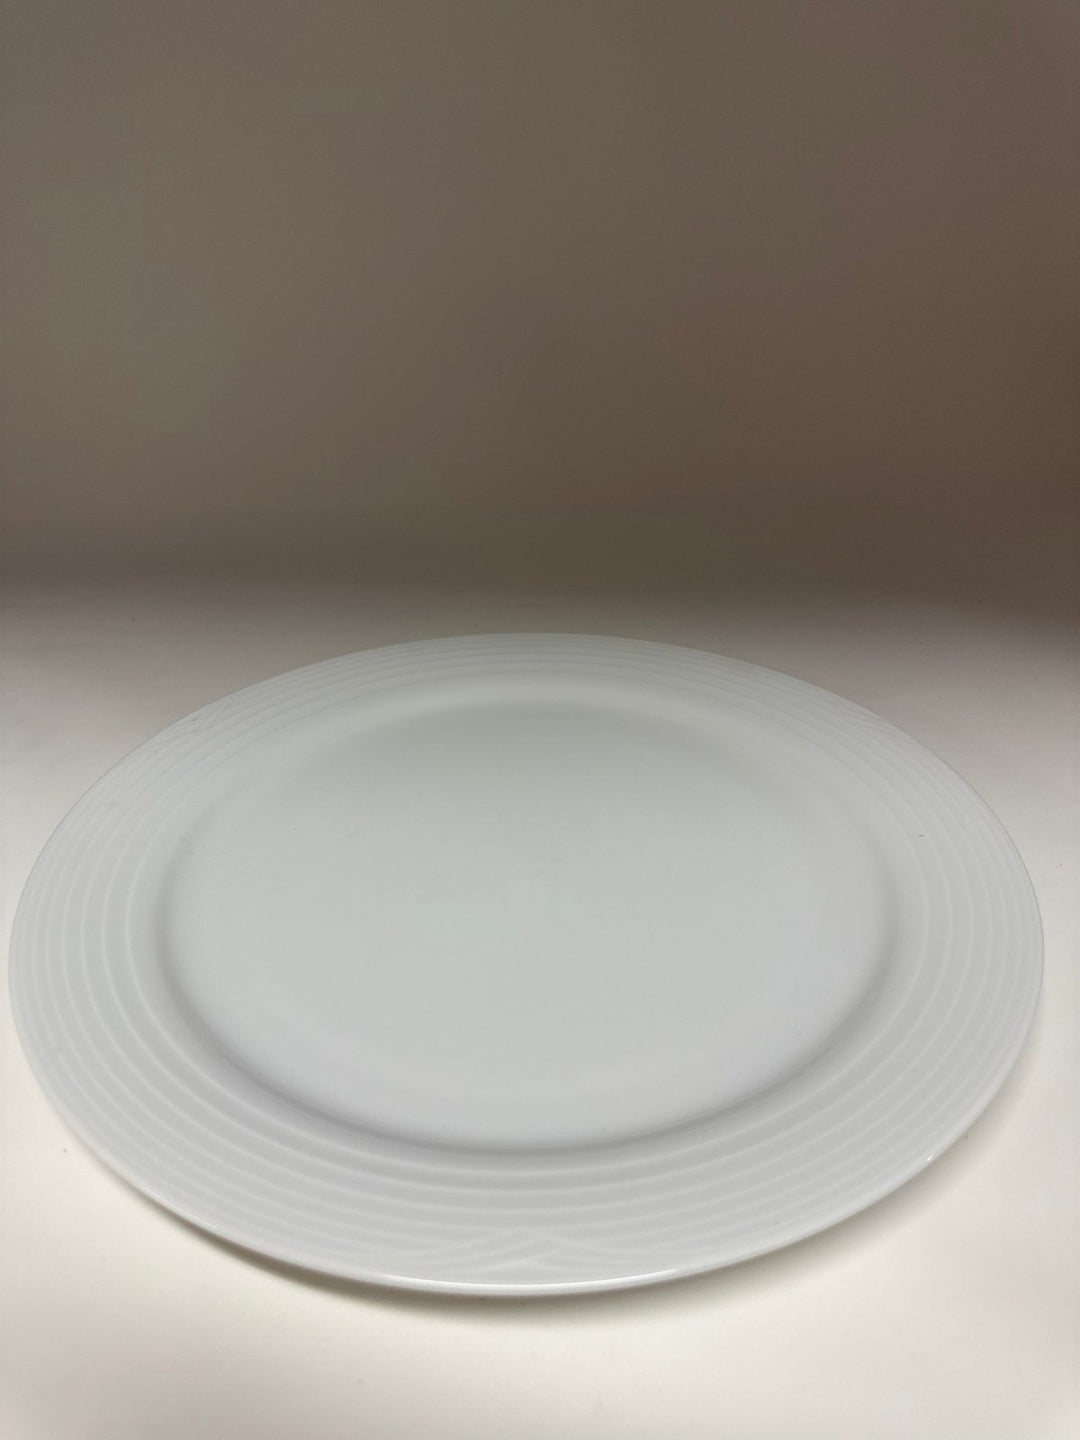 Noritake Arctic White Bread and Butter Plate - Kitchen Smart